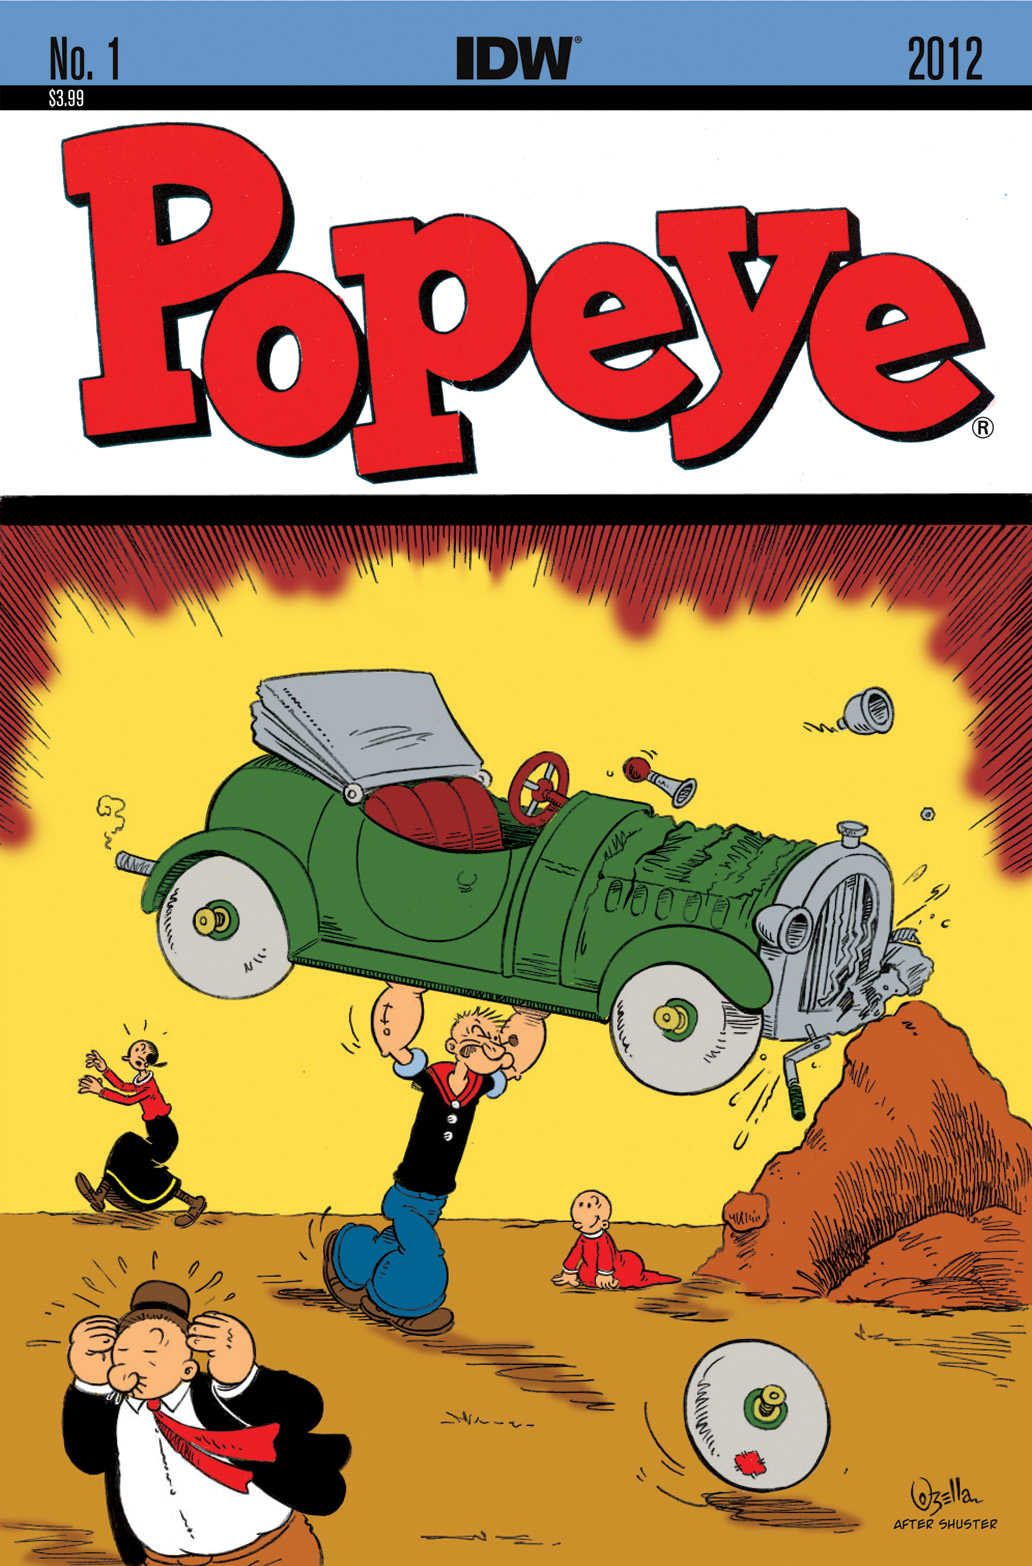 IDW Publishers: Popeye #1 (2012) Cover A